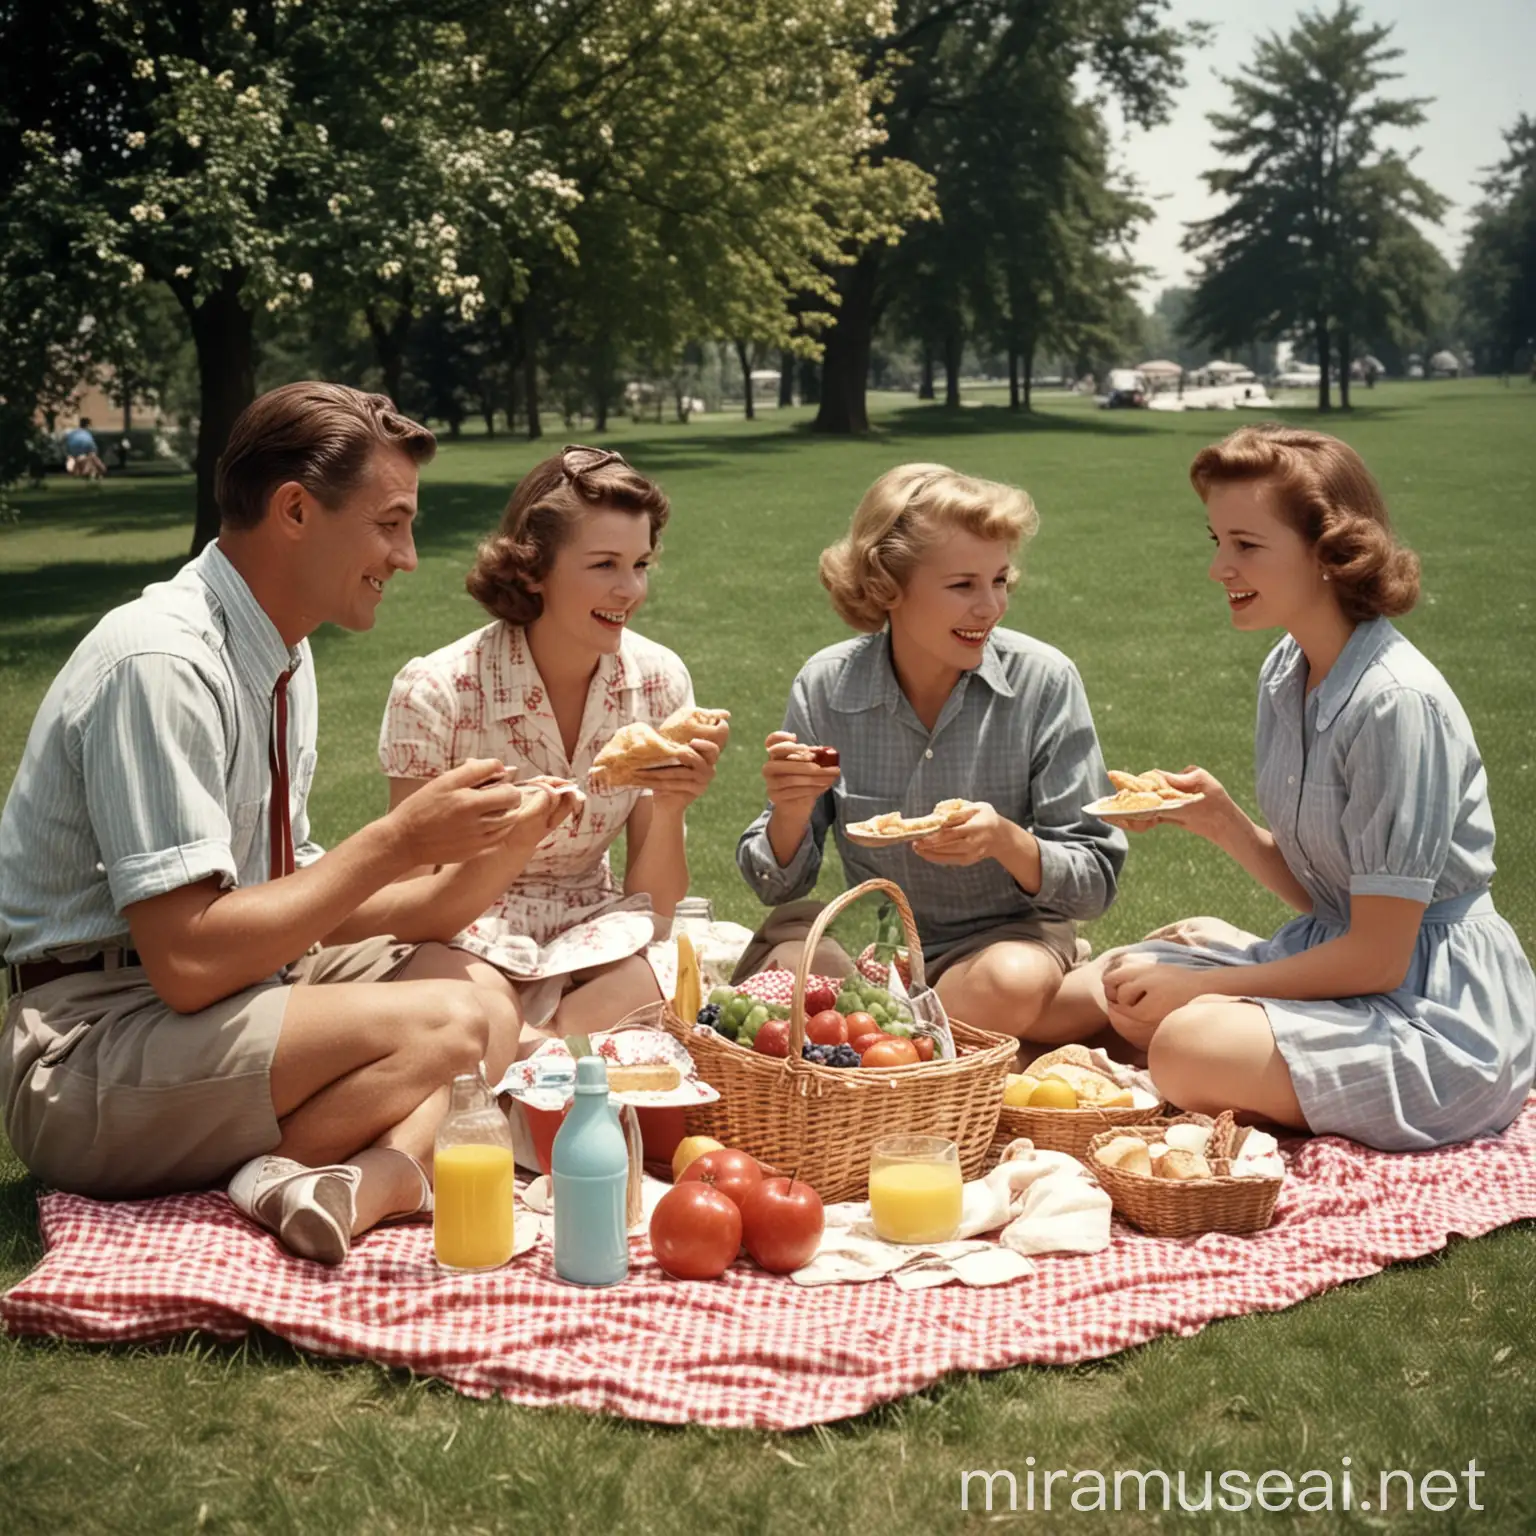 Nostalgic 1960s Family Picnic with Baby Boomers